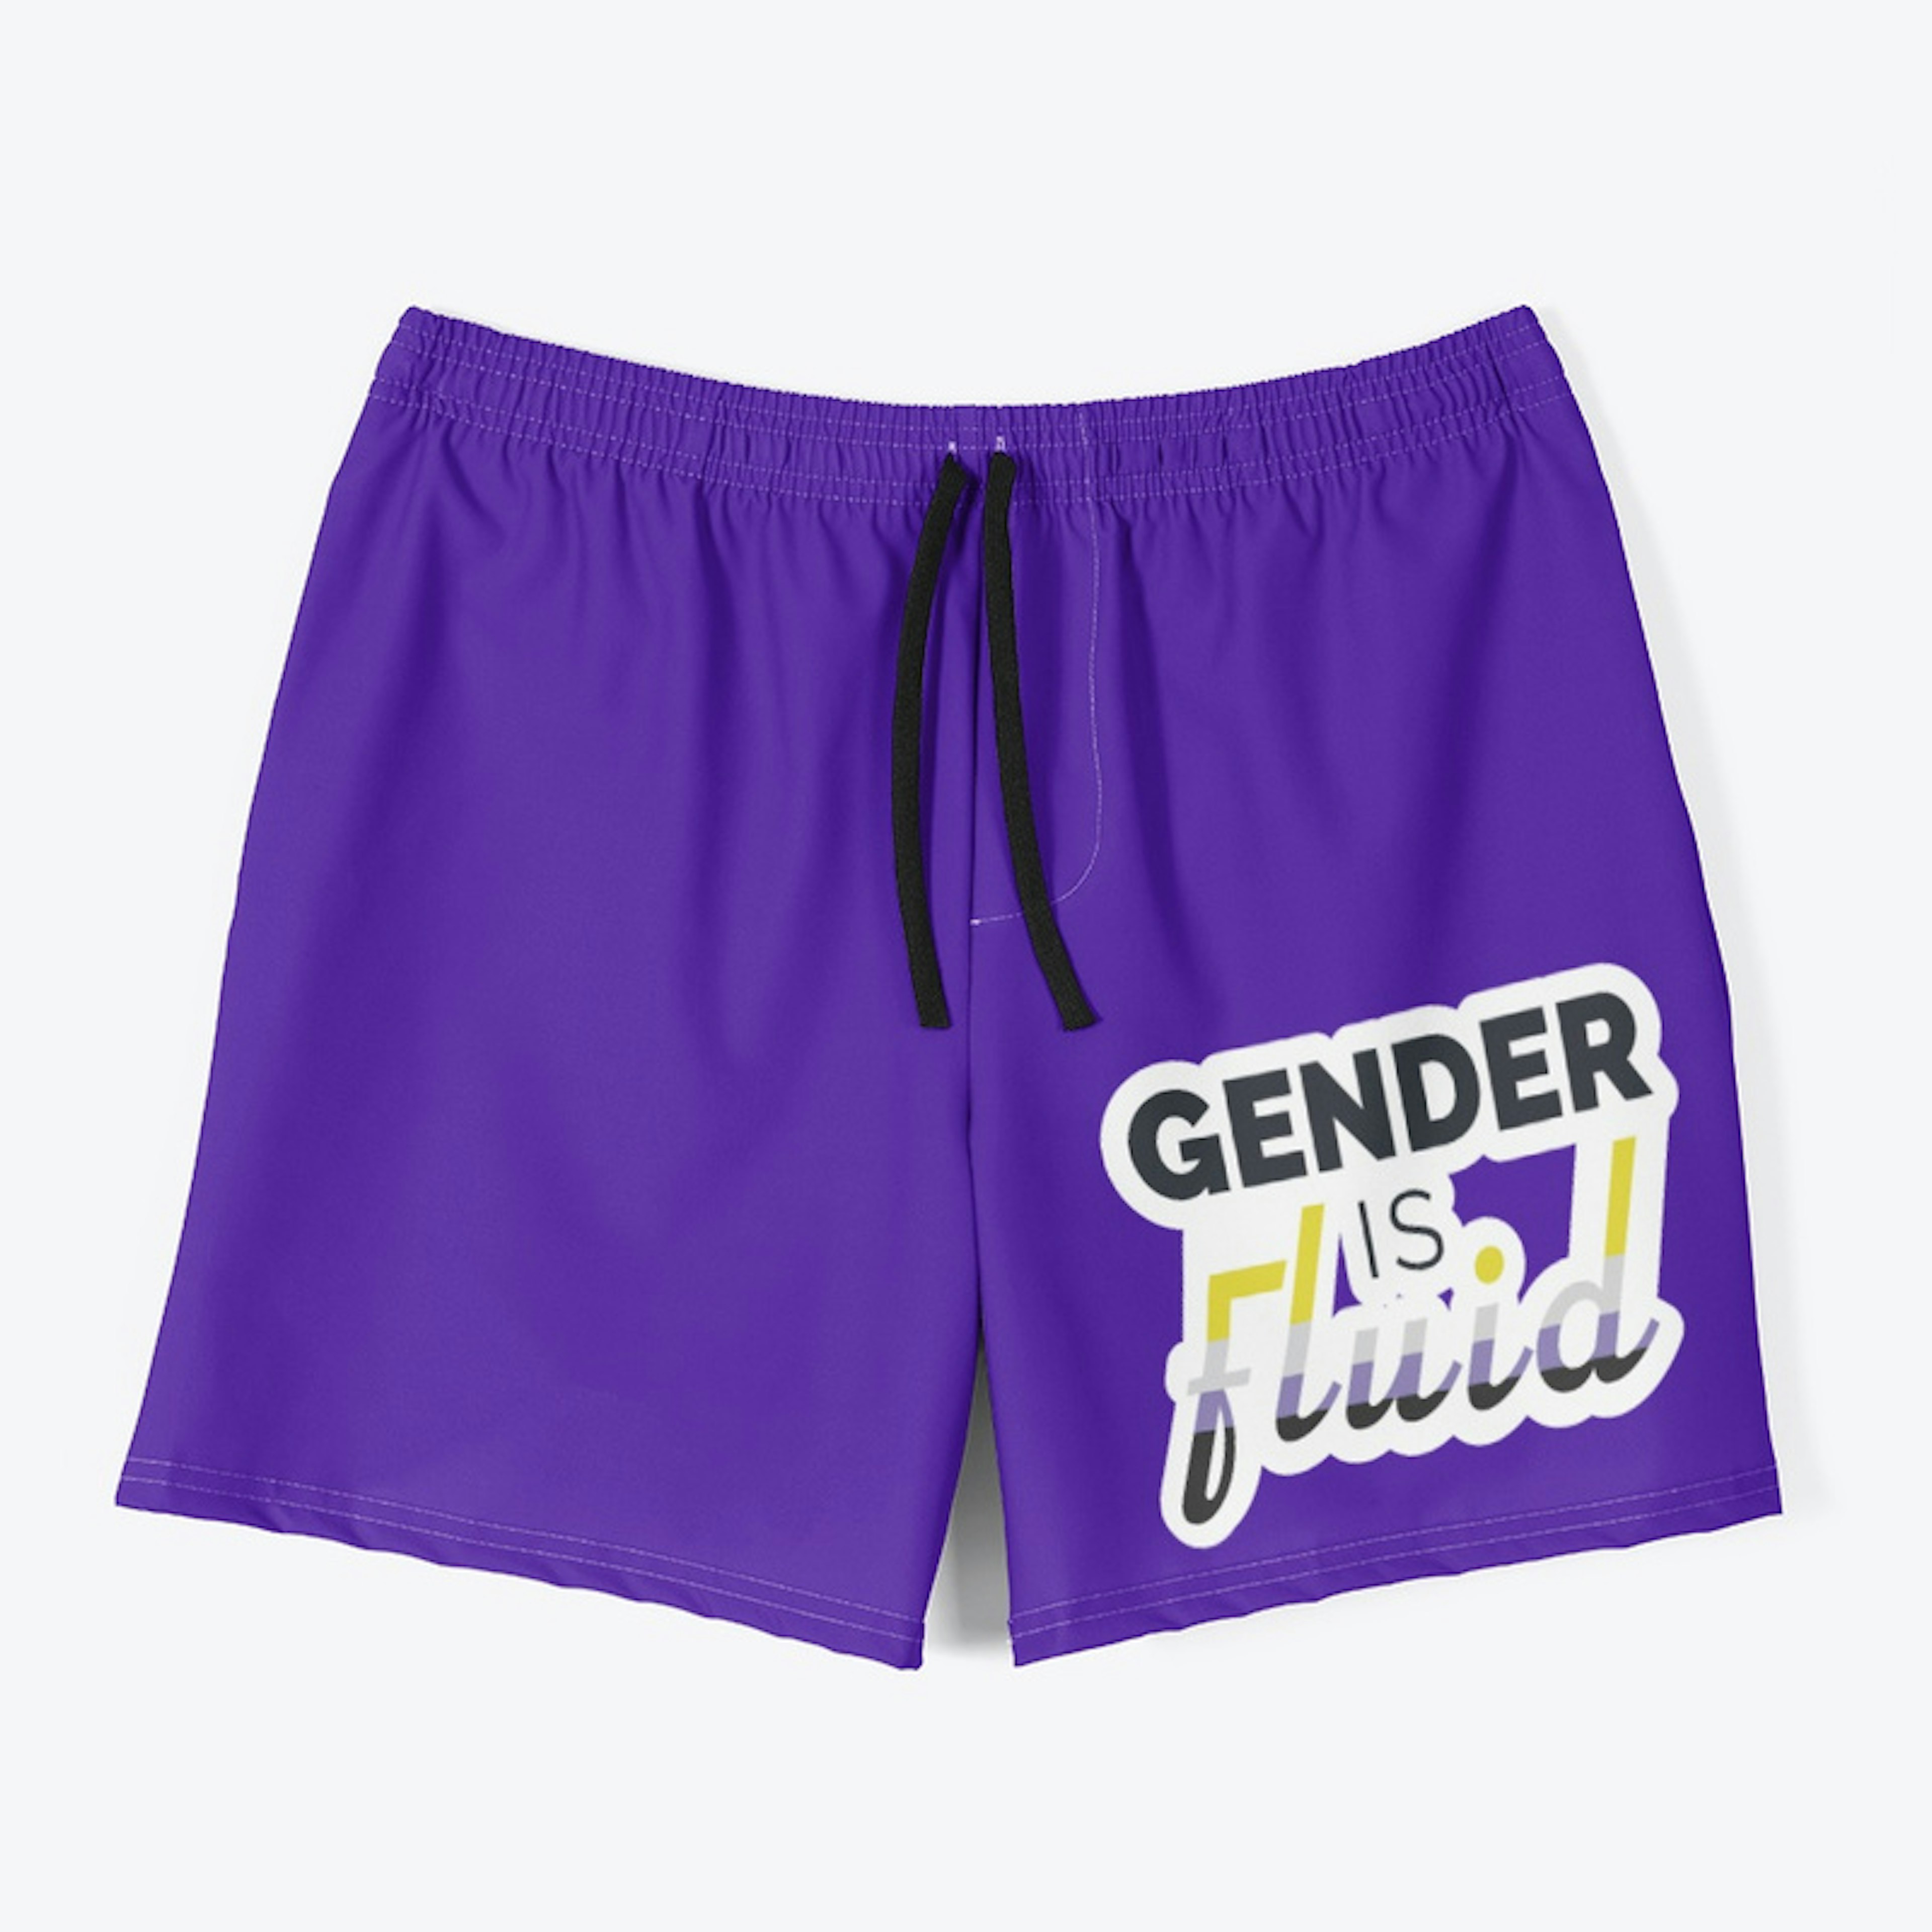 Gender is Fluid (nonbinary flag edition)